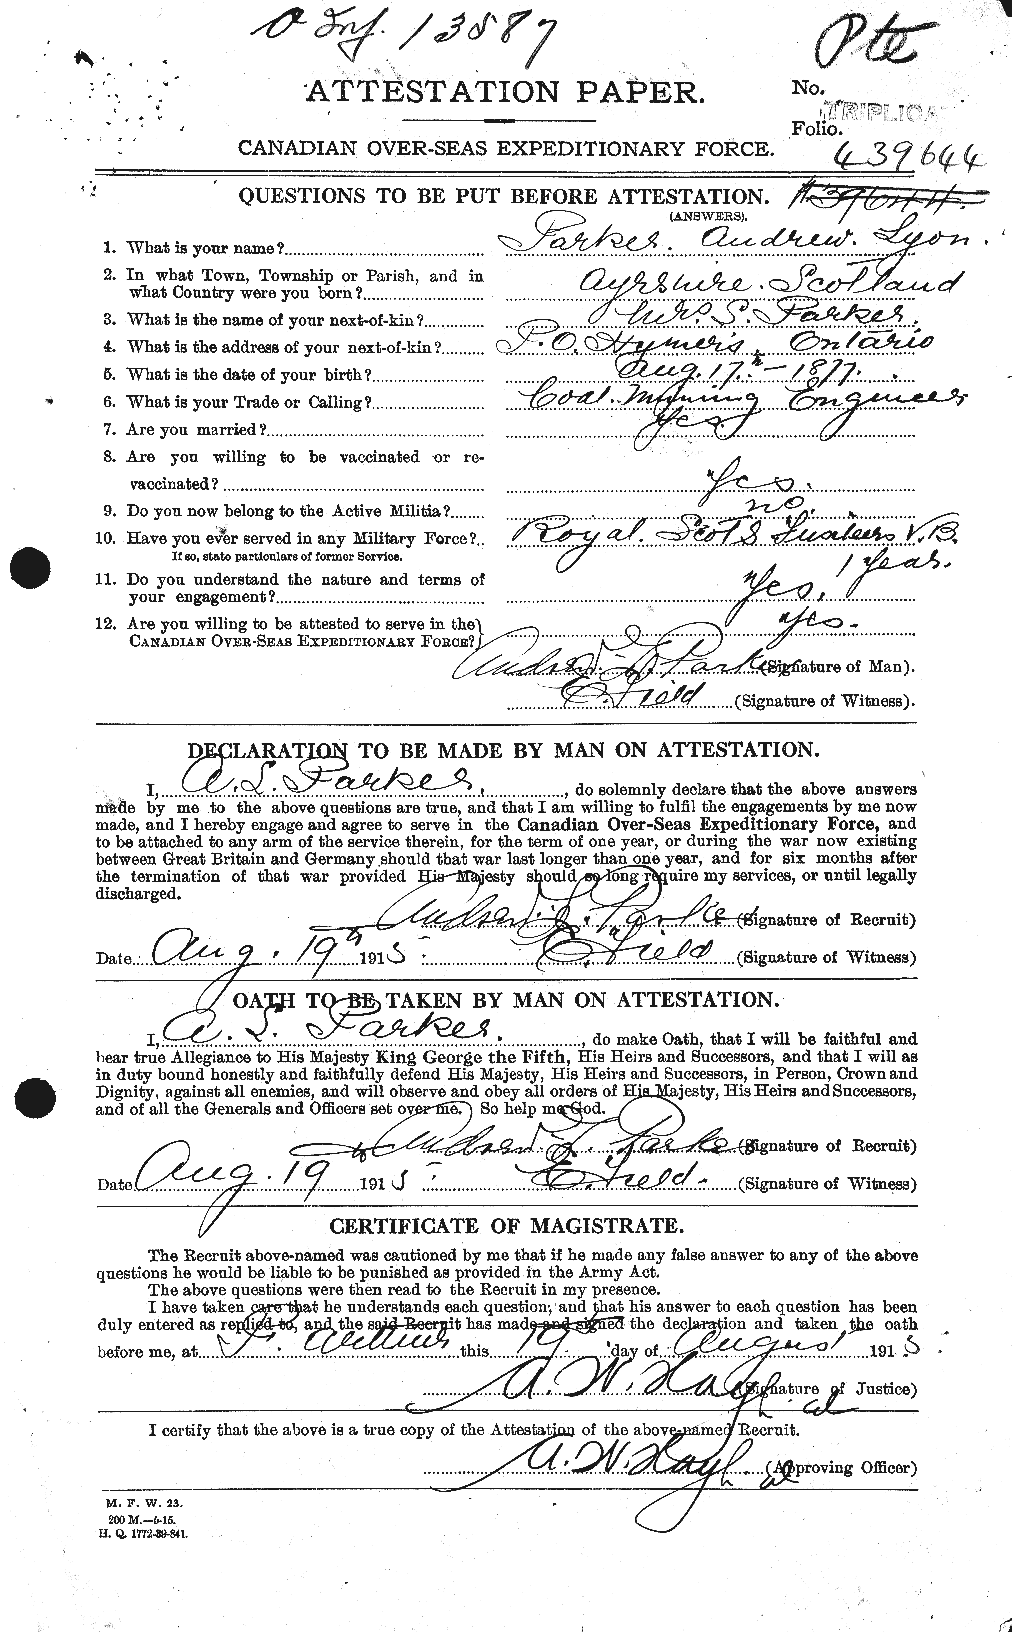 Personnel Records of the First World War - CEF 564998a